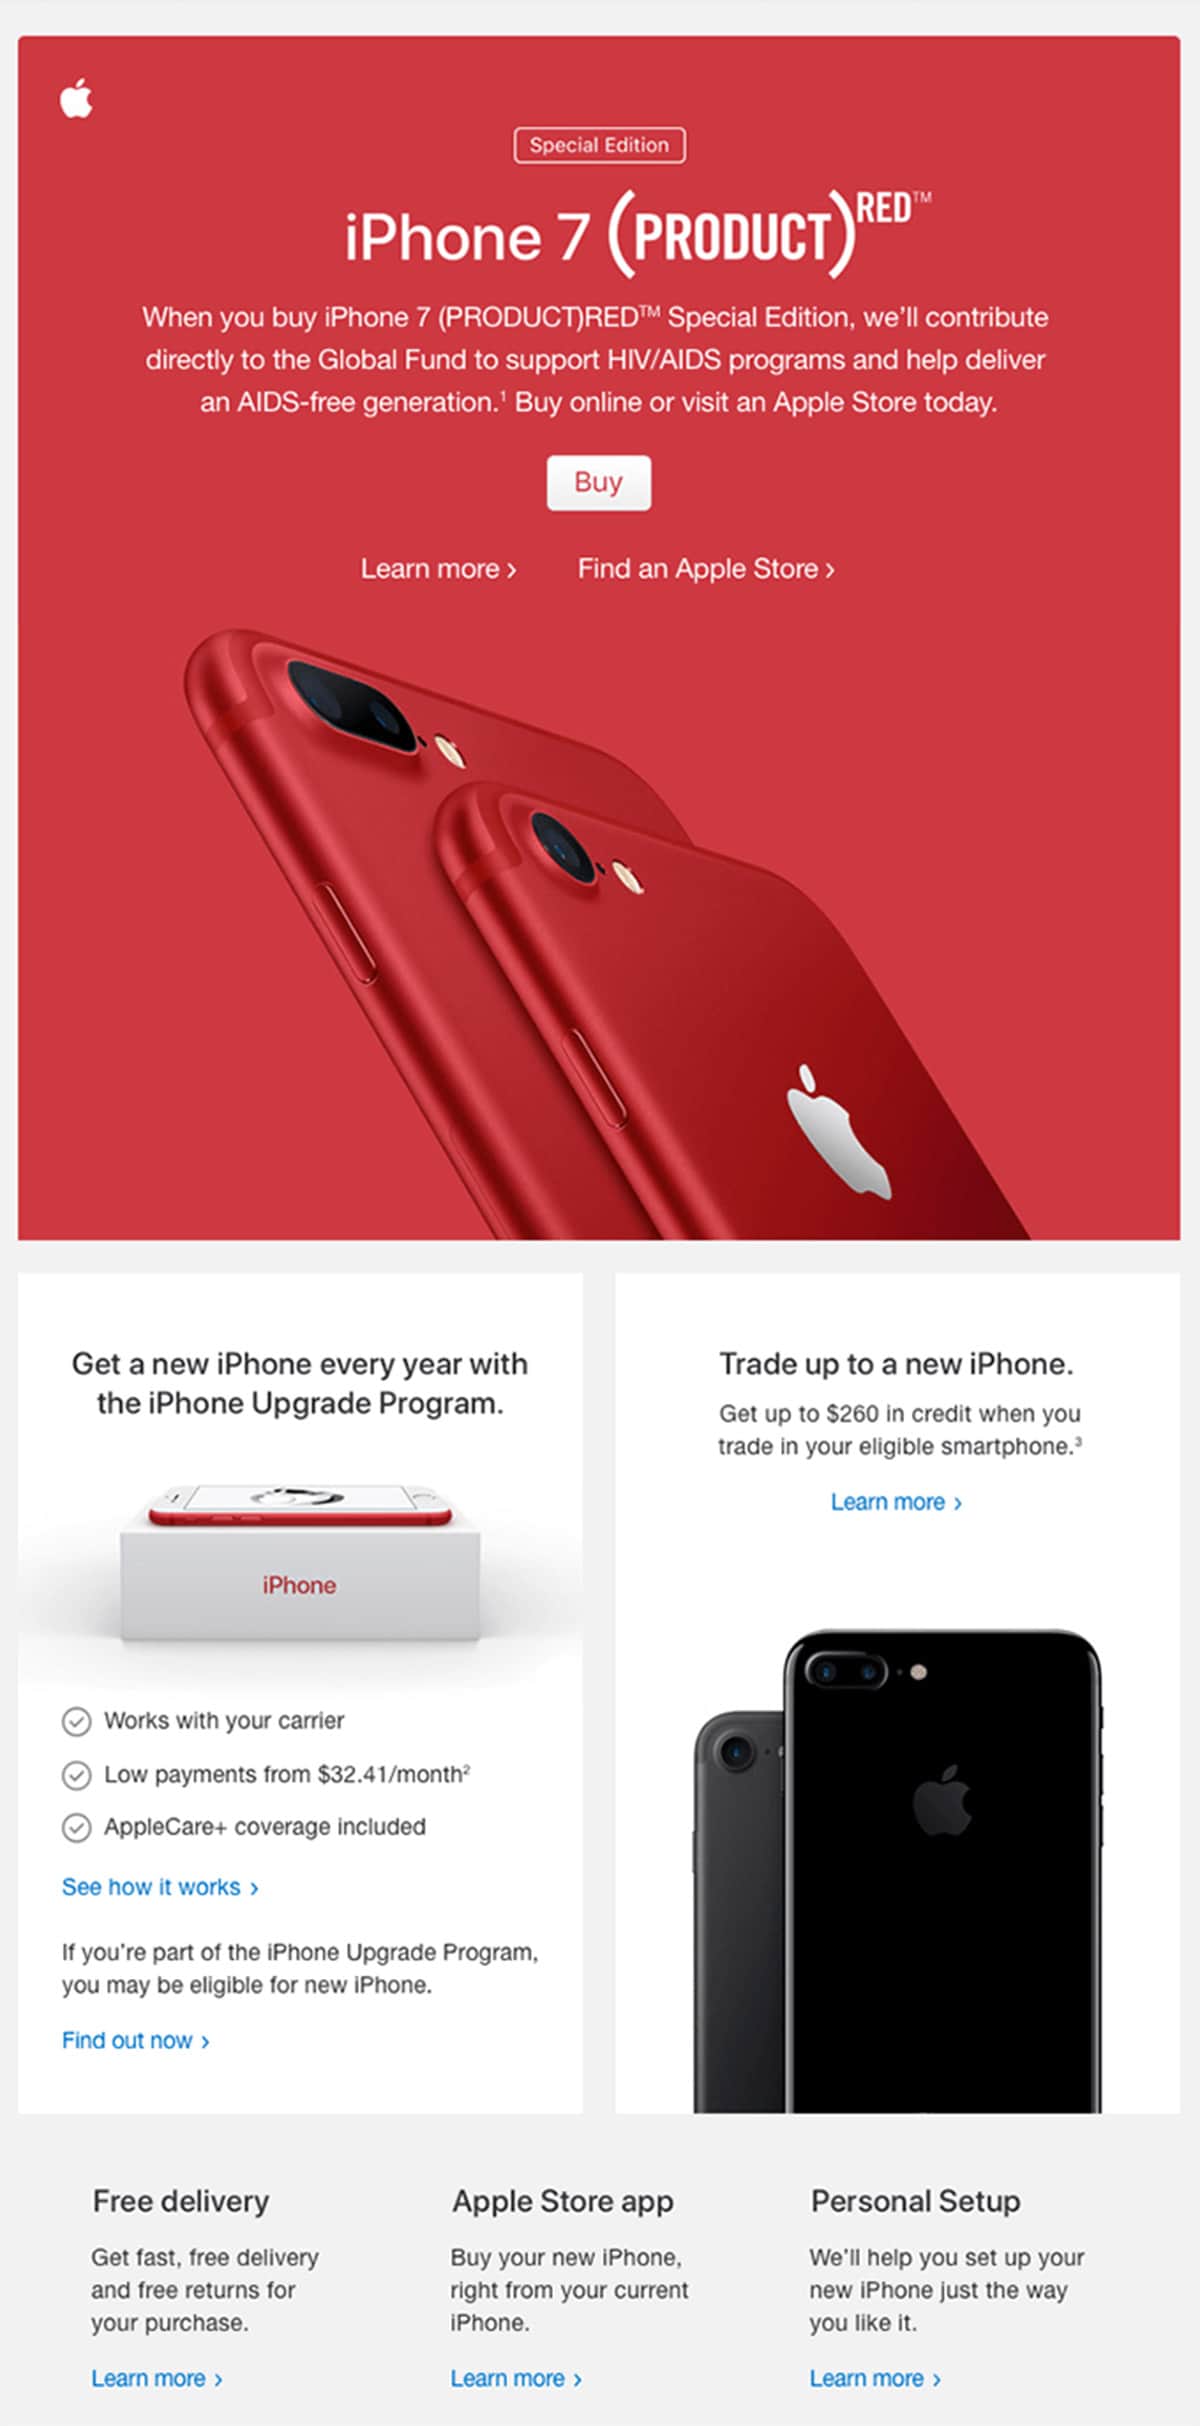 iPhone7 Red Promo Newsletter